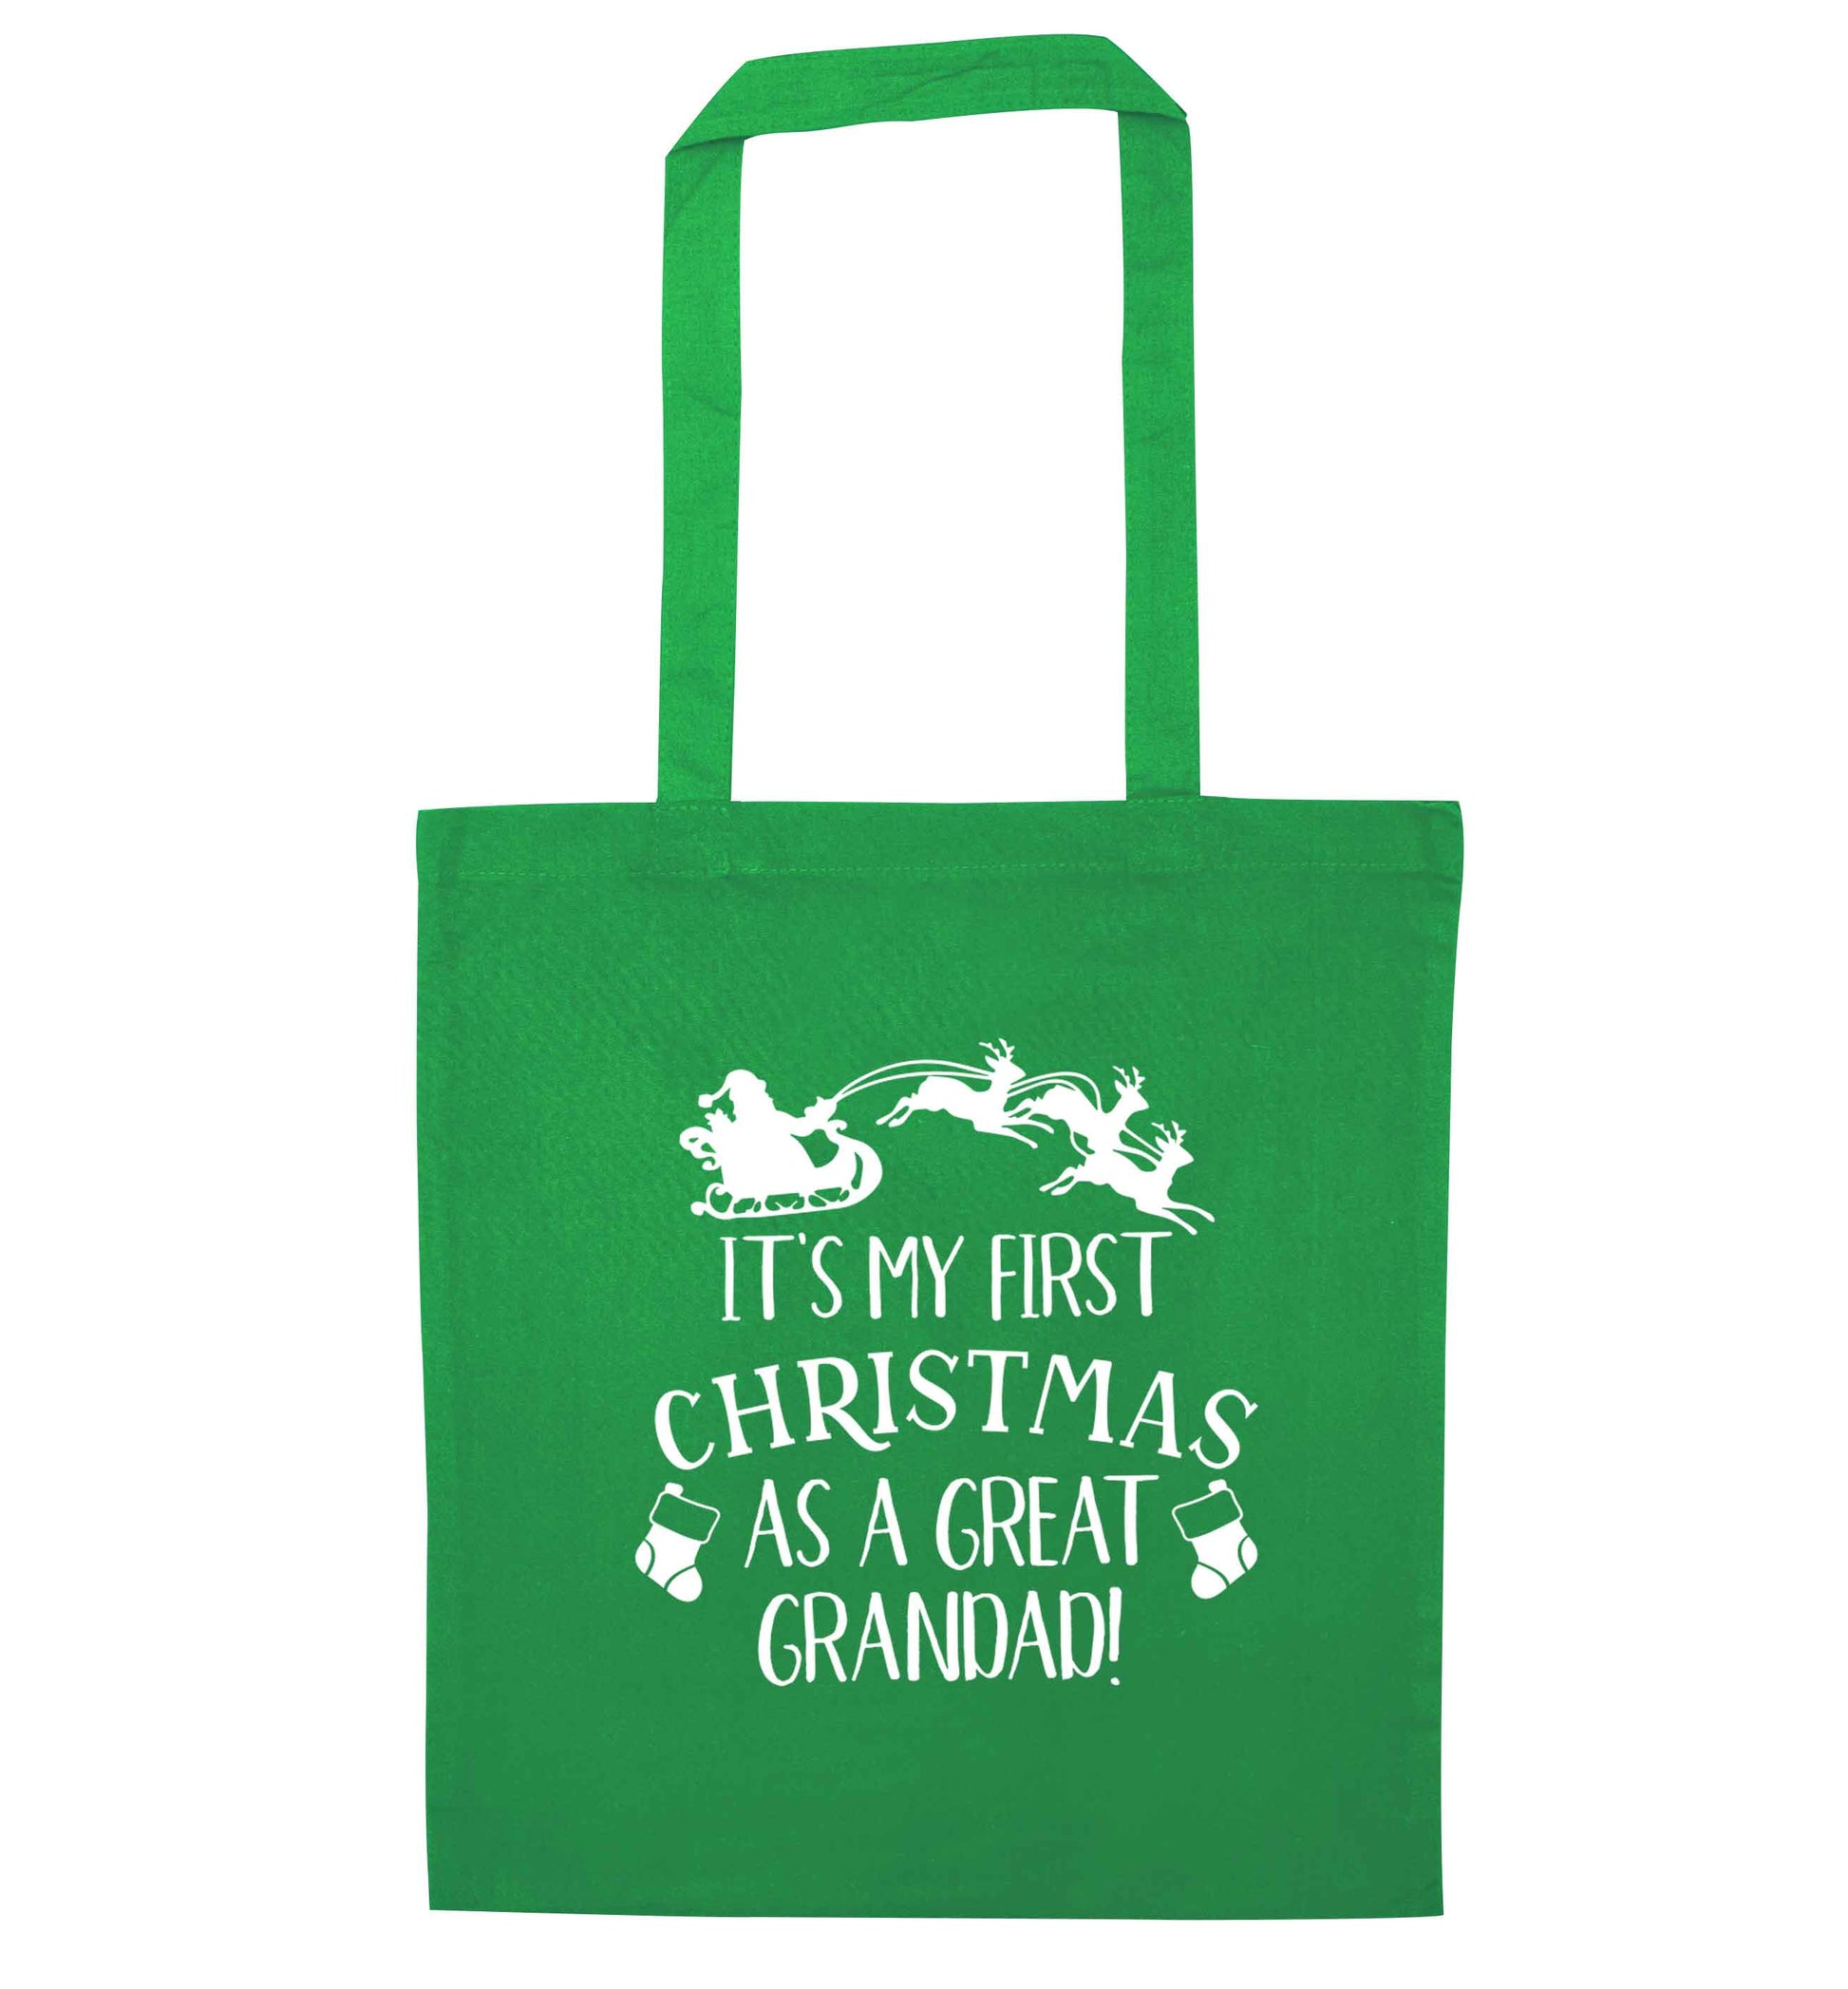 It's my first Christmas as a great grandad! green tote bag